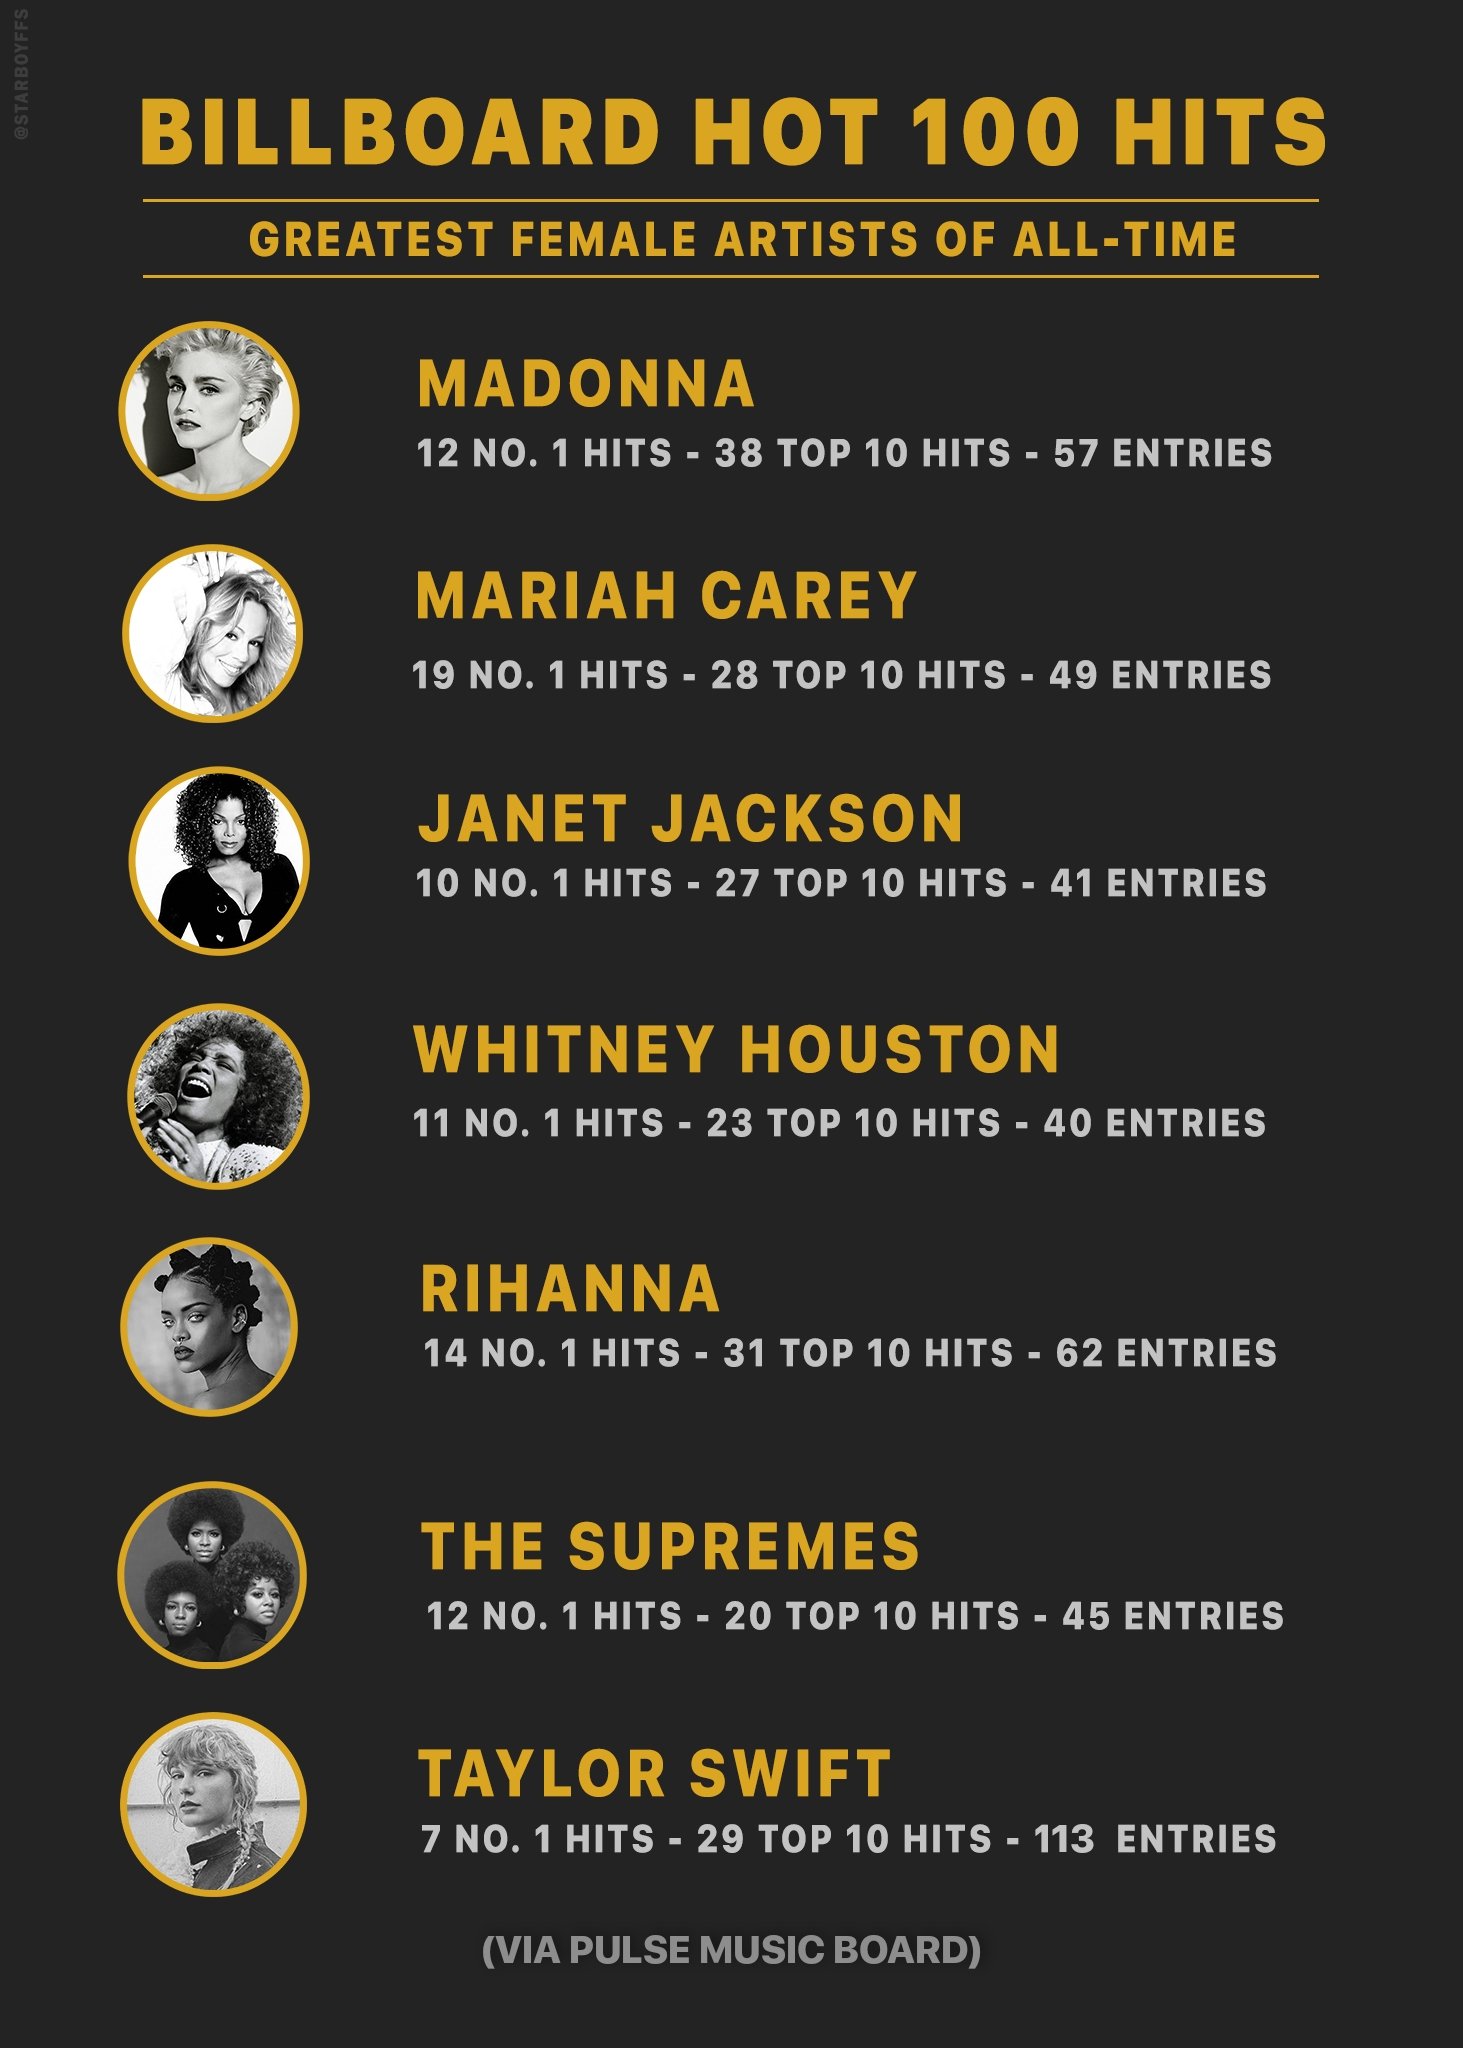 JAMES  on Twitter: "The Greatest Billboard Hot 100 Artists (Female) of All-Time, updated as of 2020. No fave on this list, NO OPINION. https://t.co/fbCJ6dXCMx" / Twitter